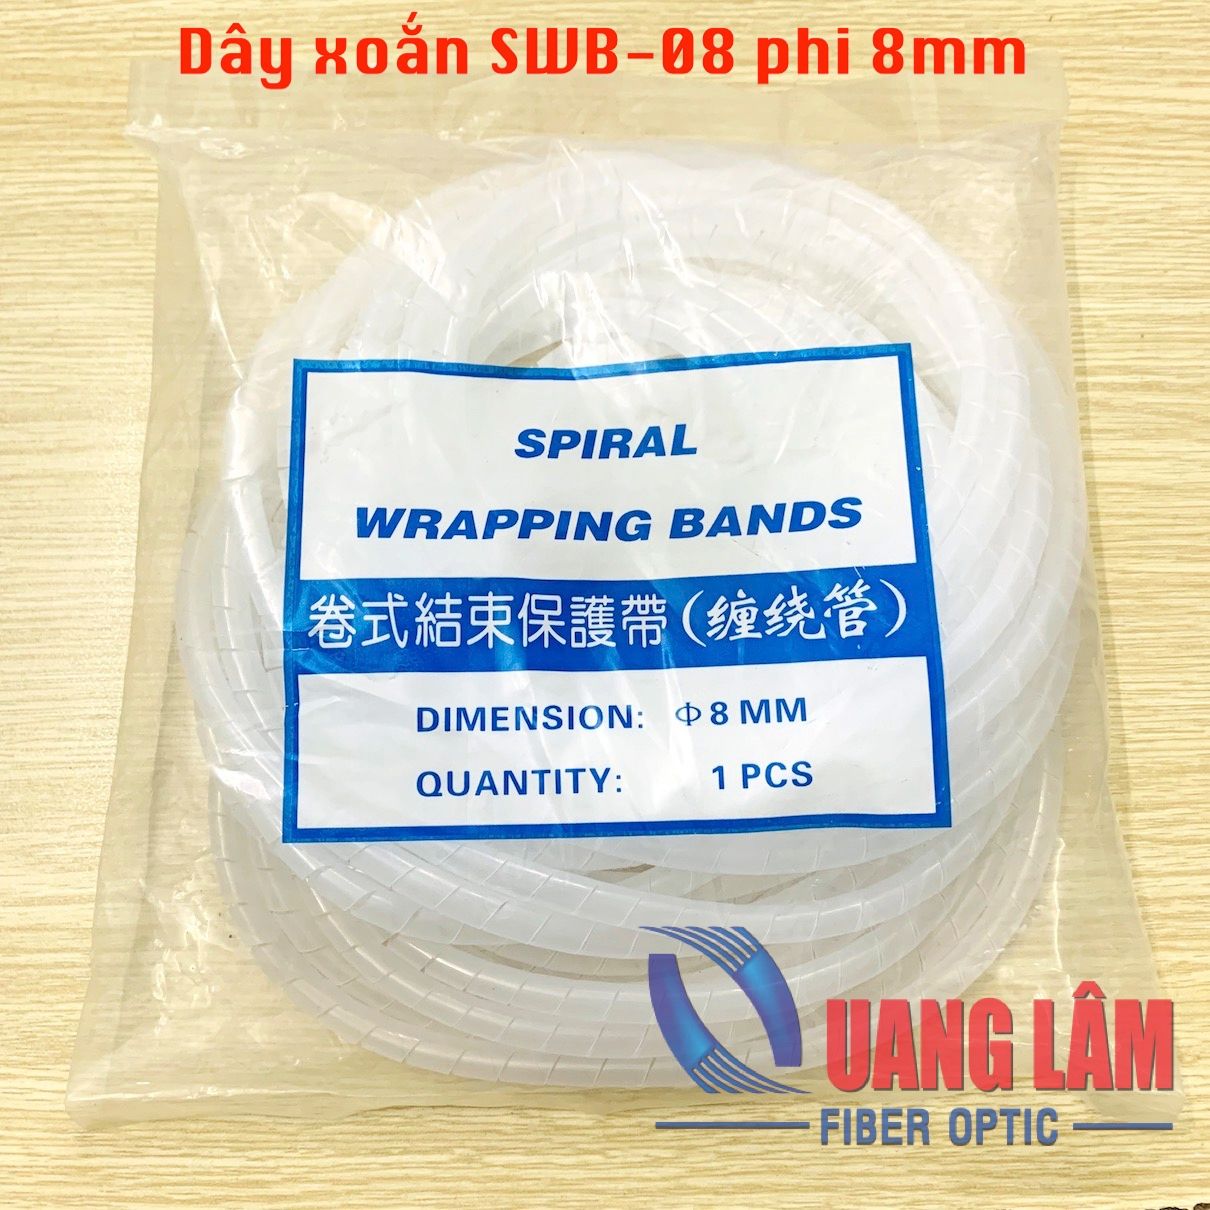 Dây xoắn SWB-08 8mm - Spiral Wrapping Bands